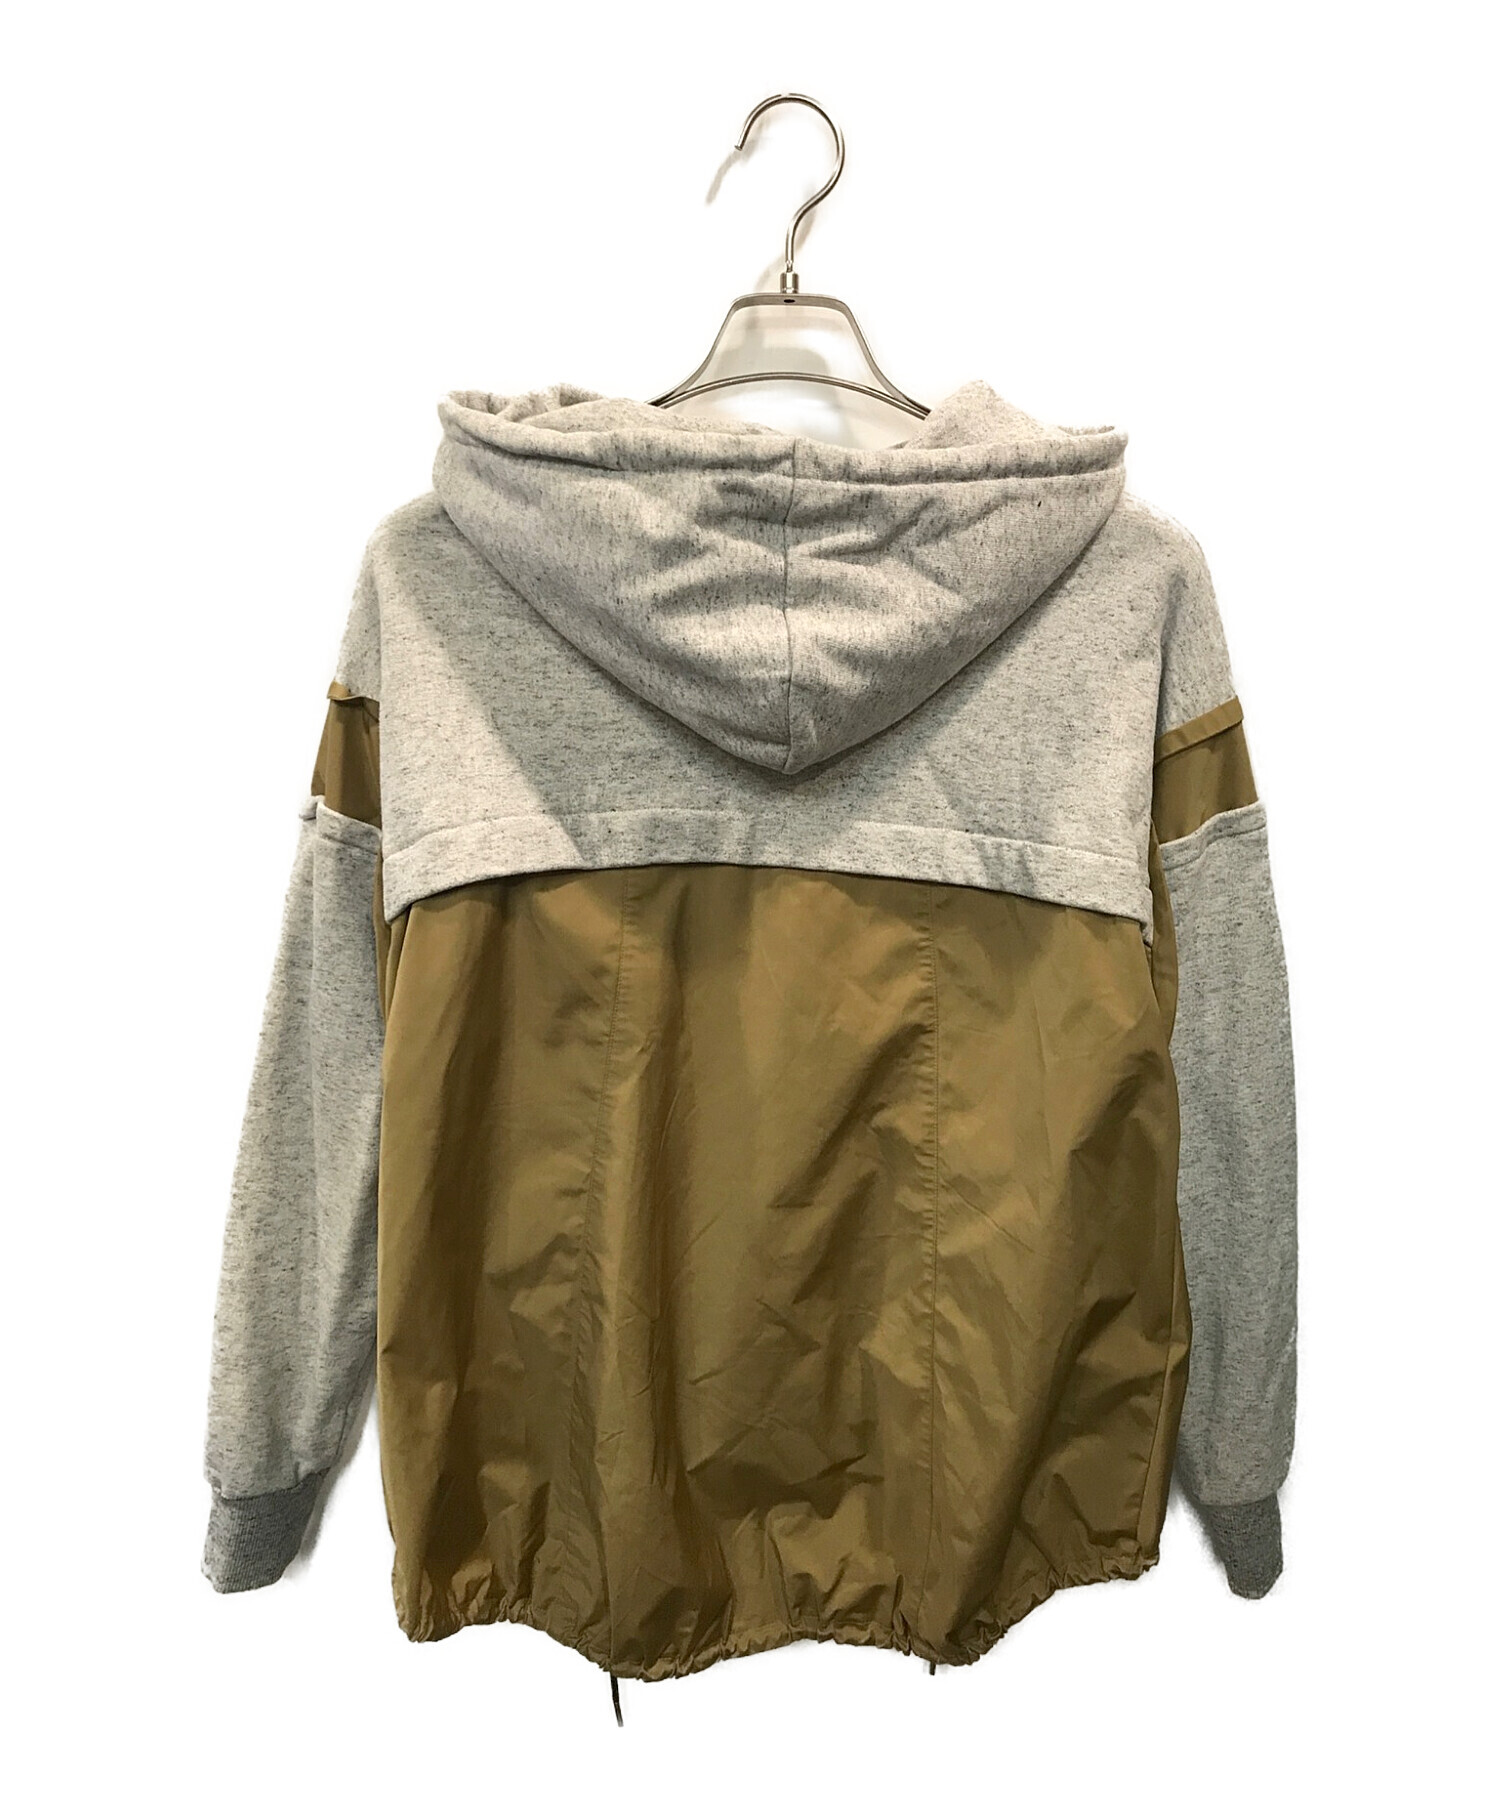 nagonstans 新作新品 hoodie parka フーディパーカー 黒 - トップス